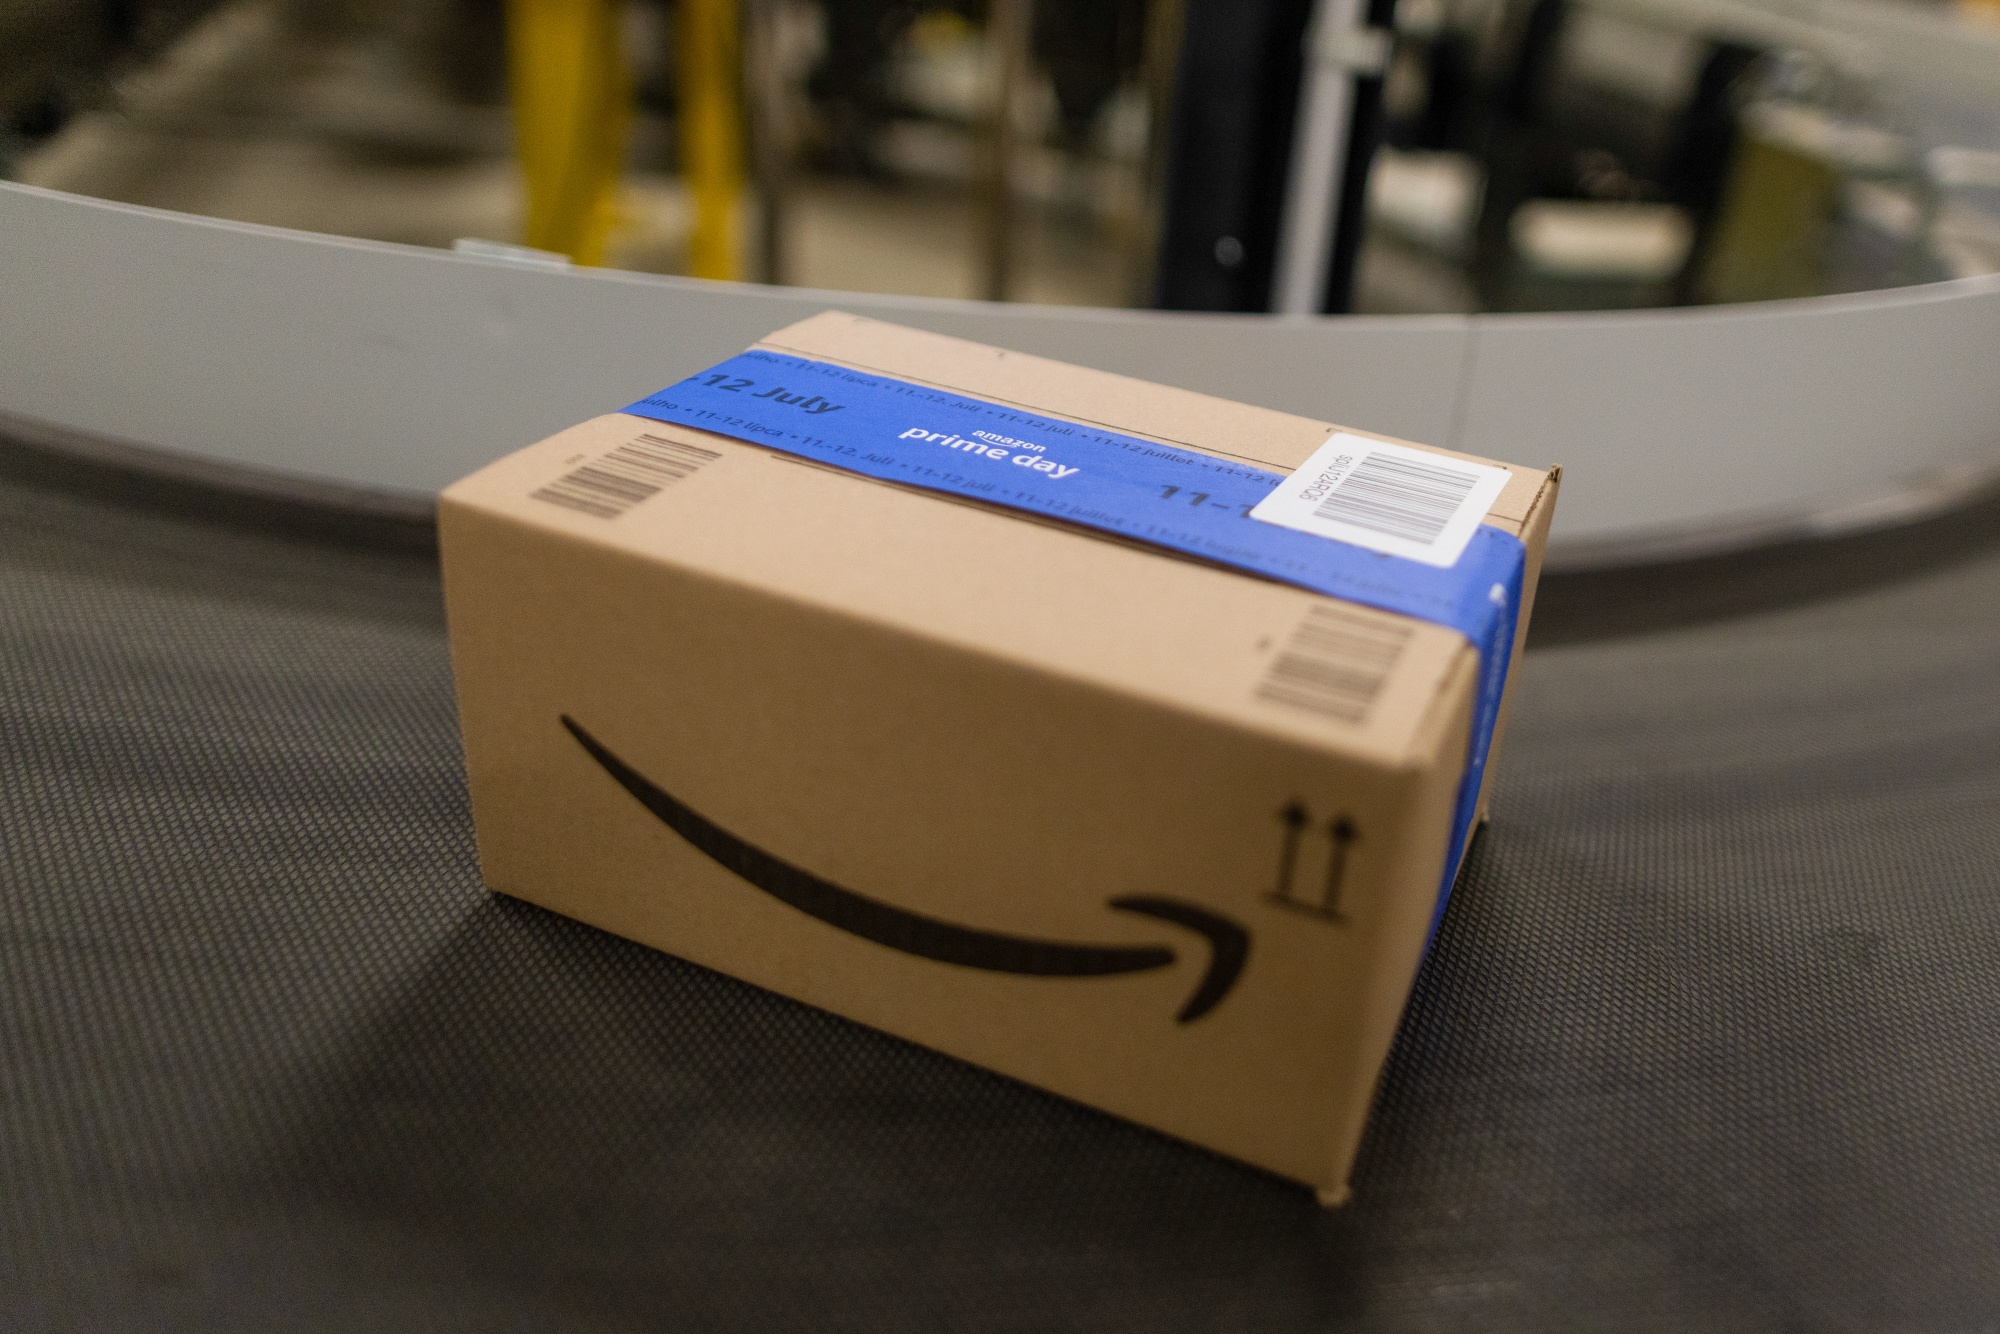 Prime Day 2.0 Is Launching Tomorrow to Give Your Holiday